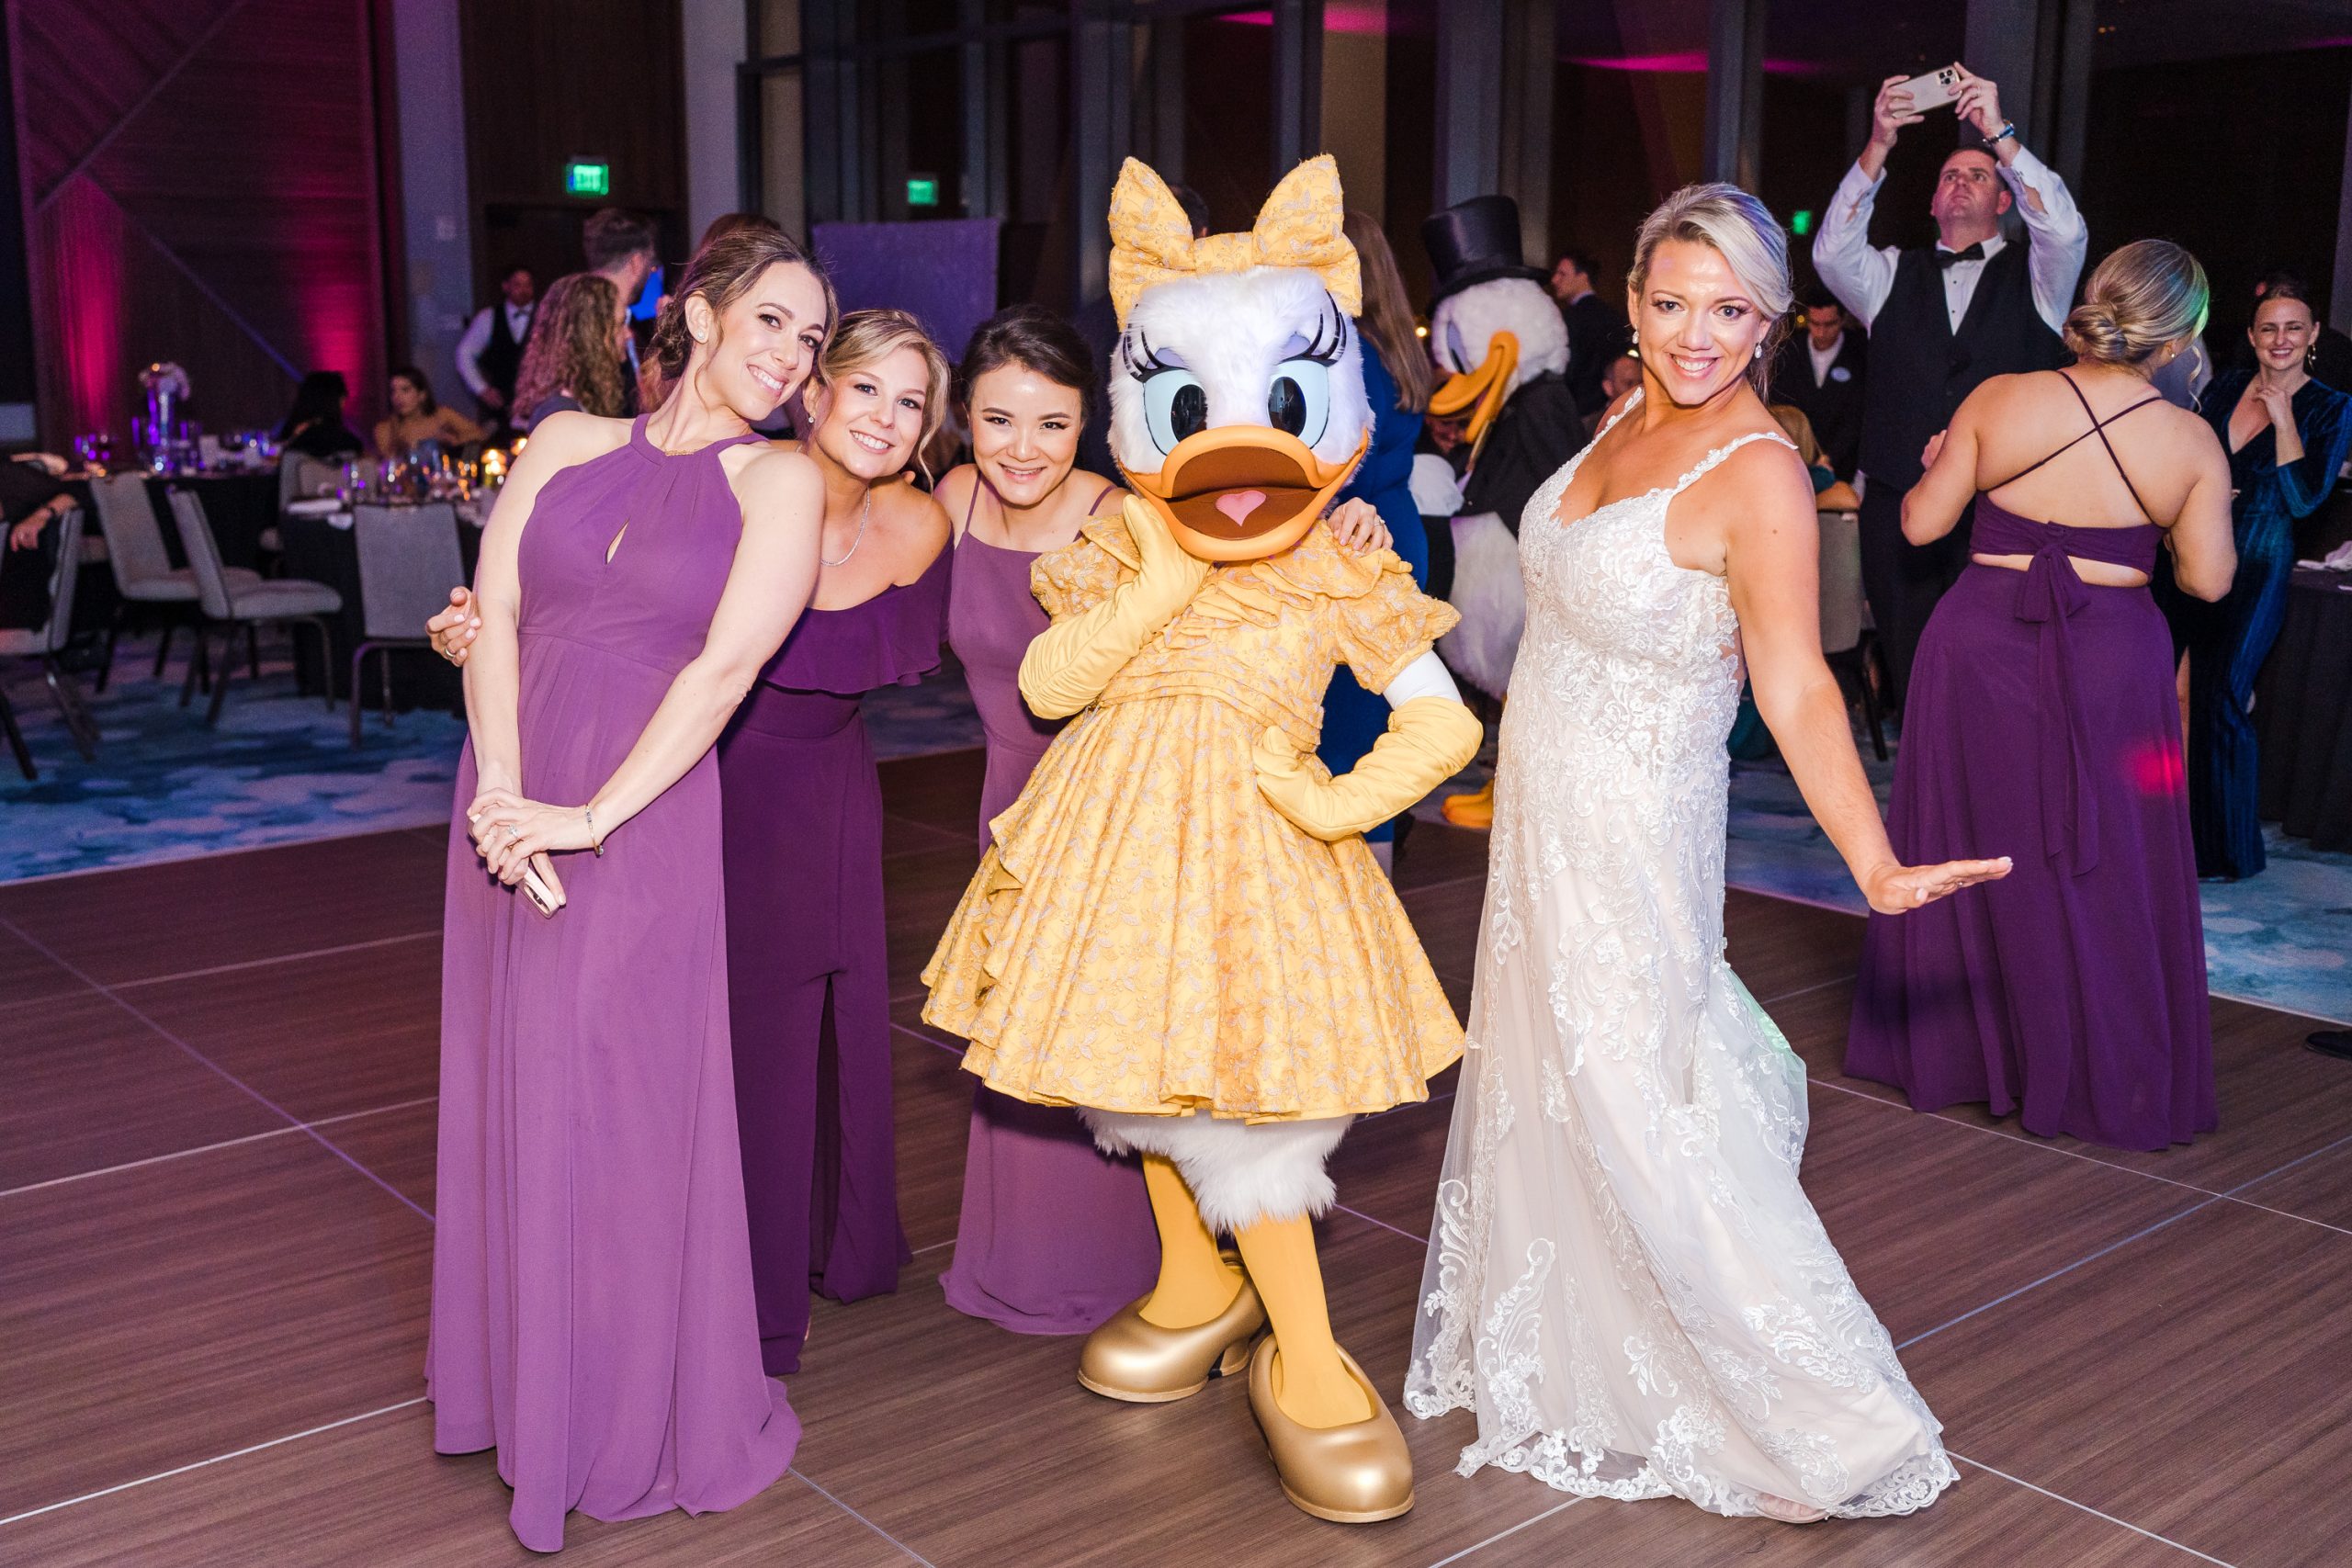 Daisy Duck posing with bride and bridesmaids